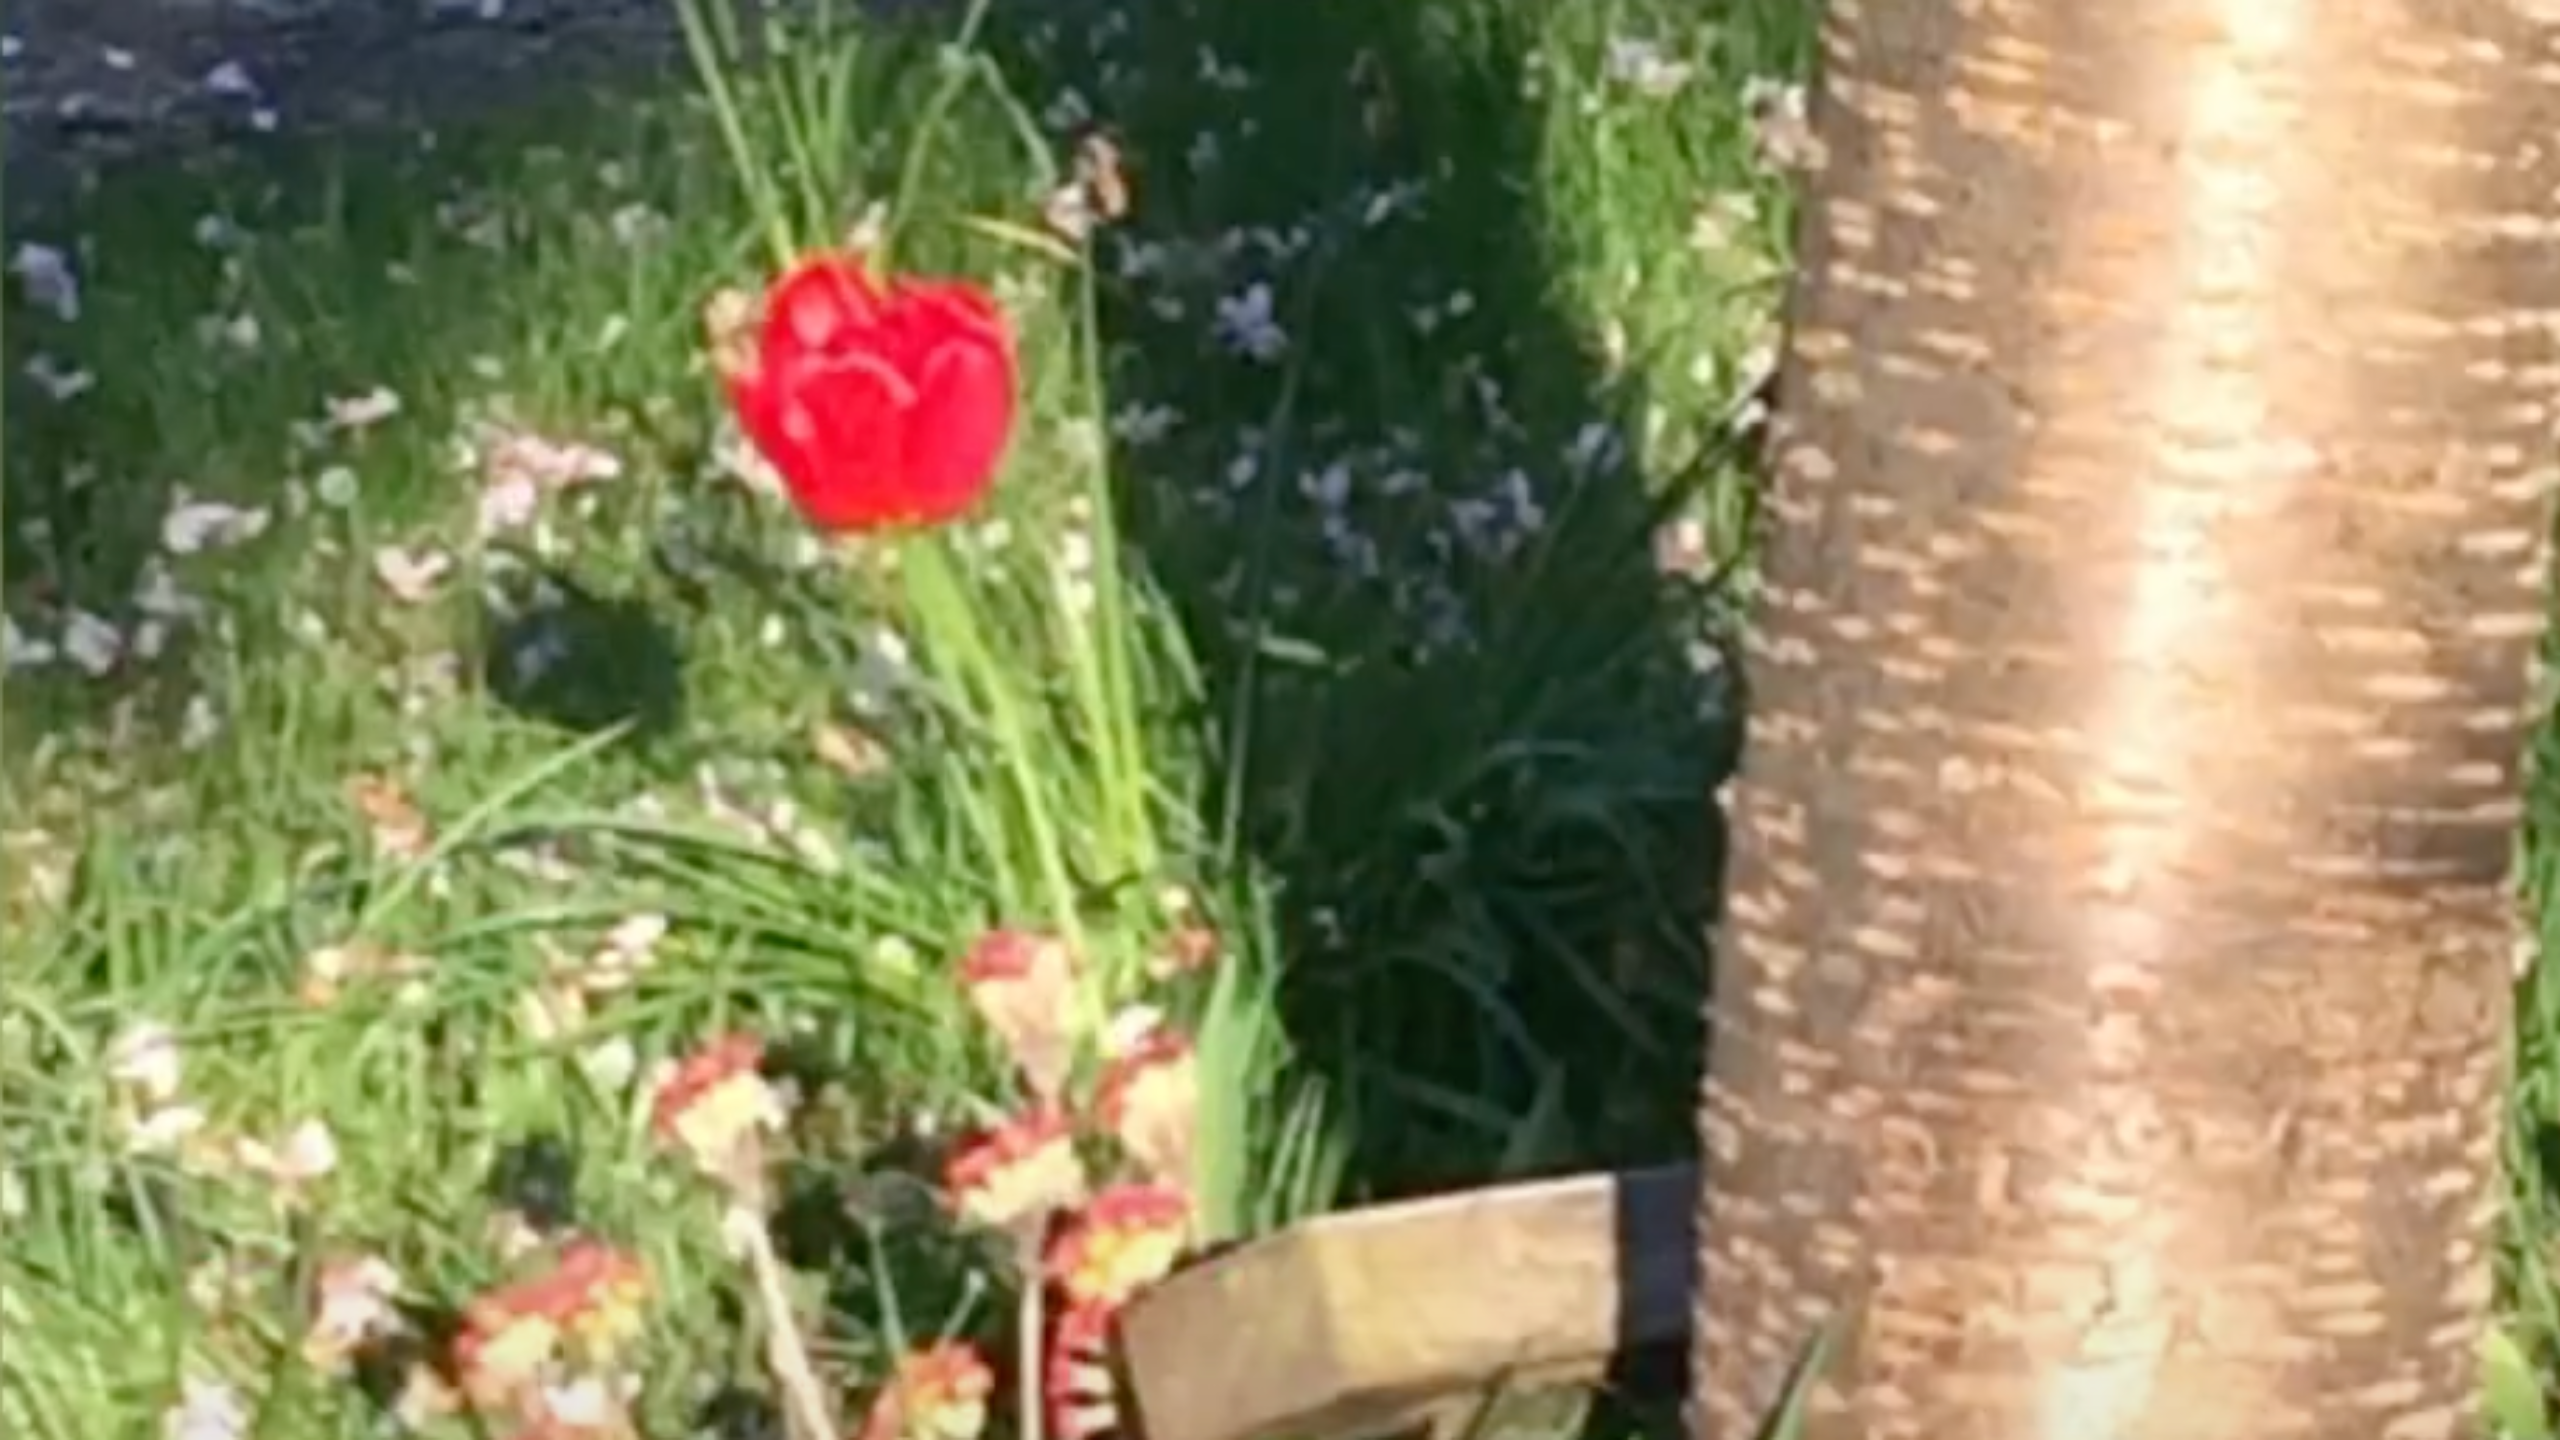 A lone, red poppy adds poignancy to the author's lockdown experience.